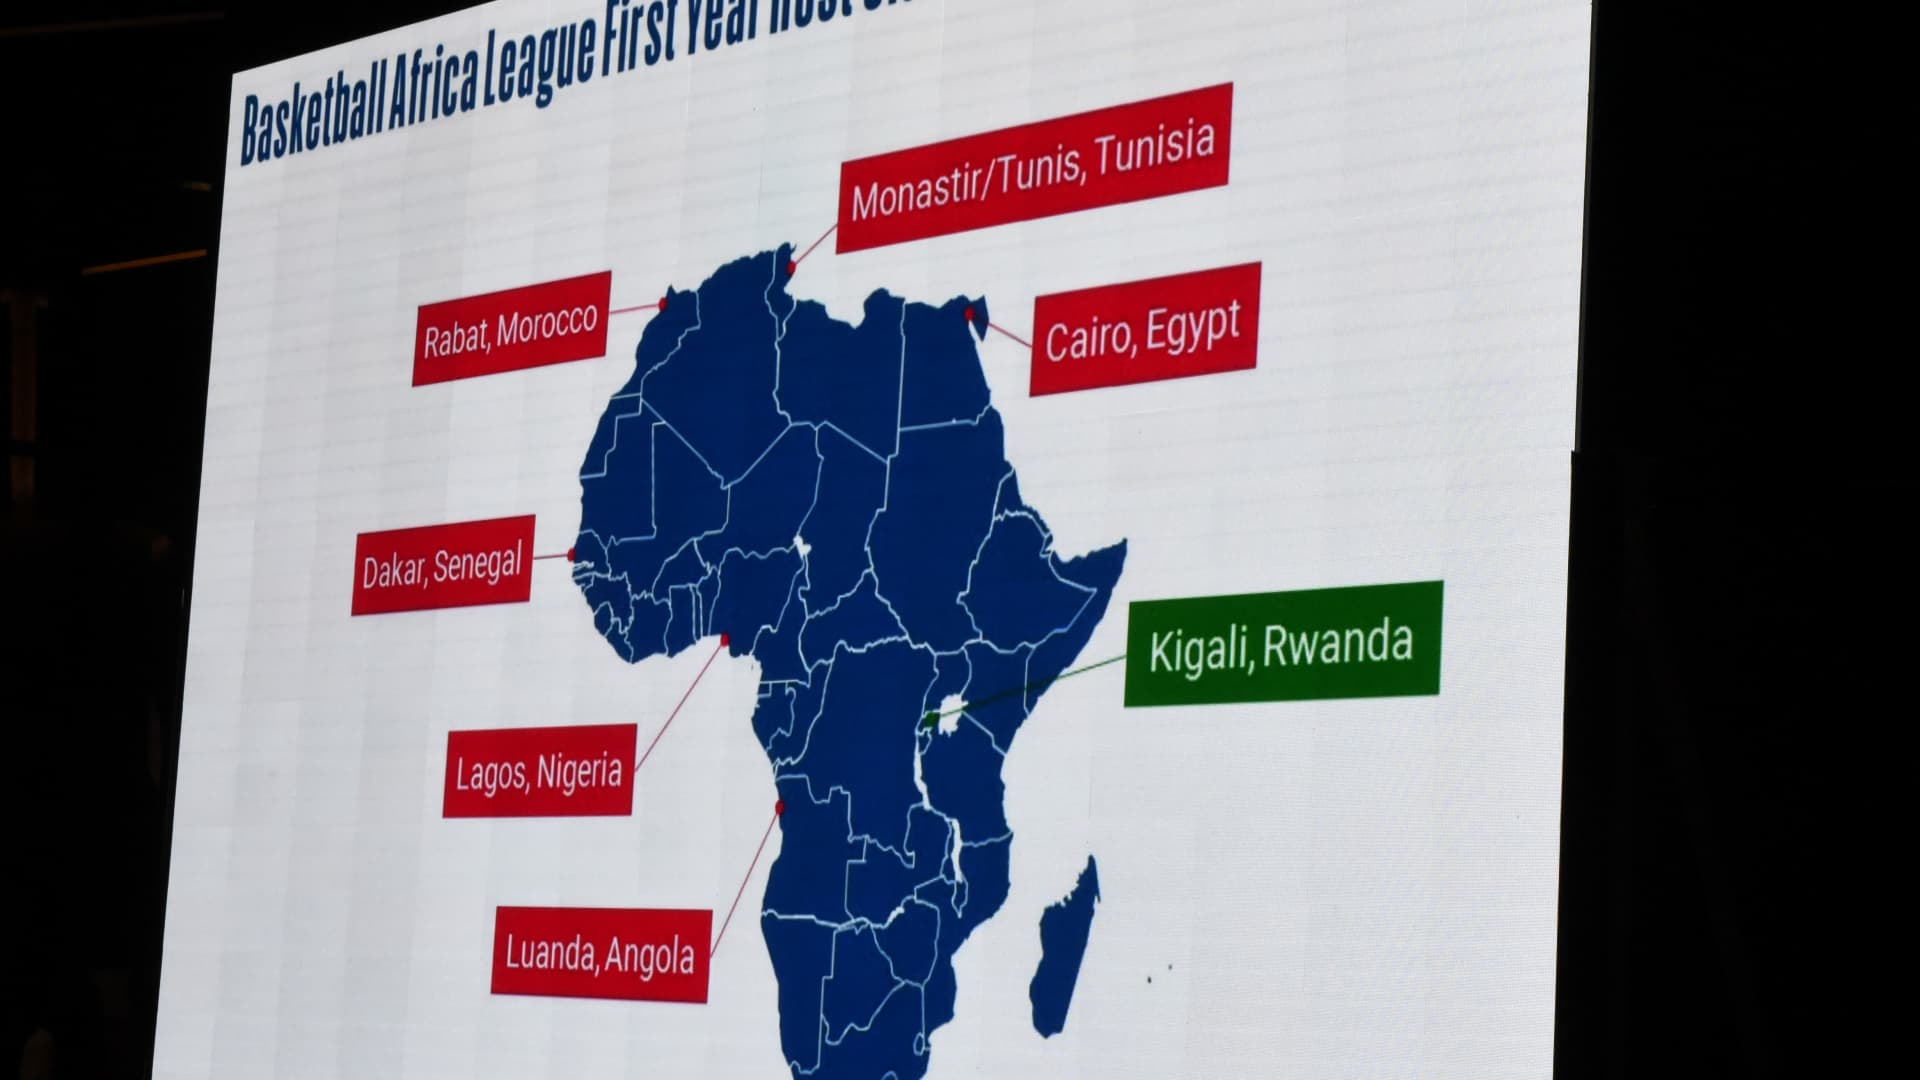 Details and information are projected on a screen during the announcement of the The NBA-backed Basketball Africa League (BAL) at the Museum of Black Civilisations in Dakar, on July 30 2019.